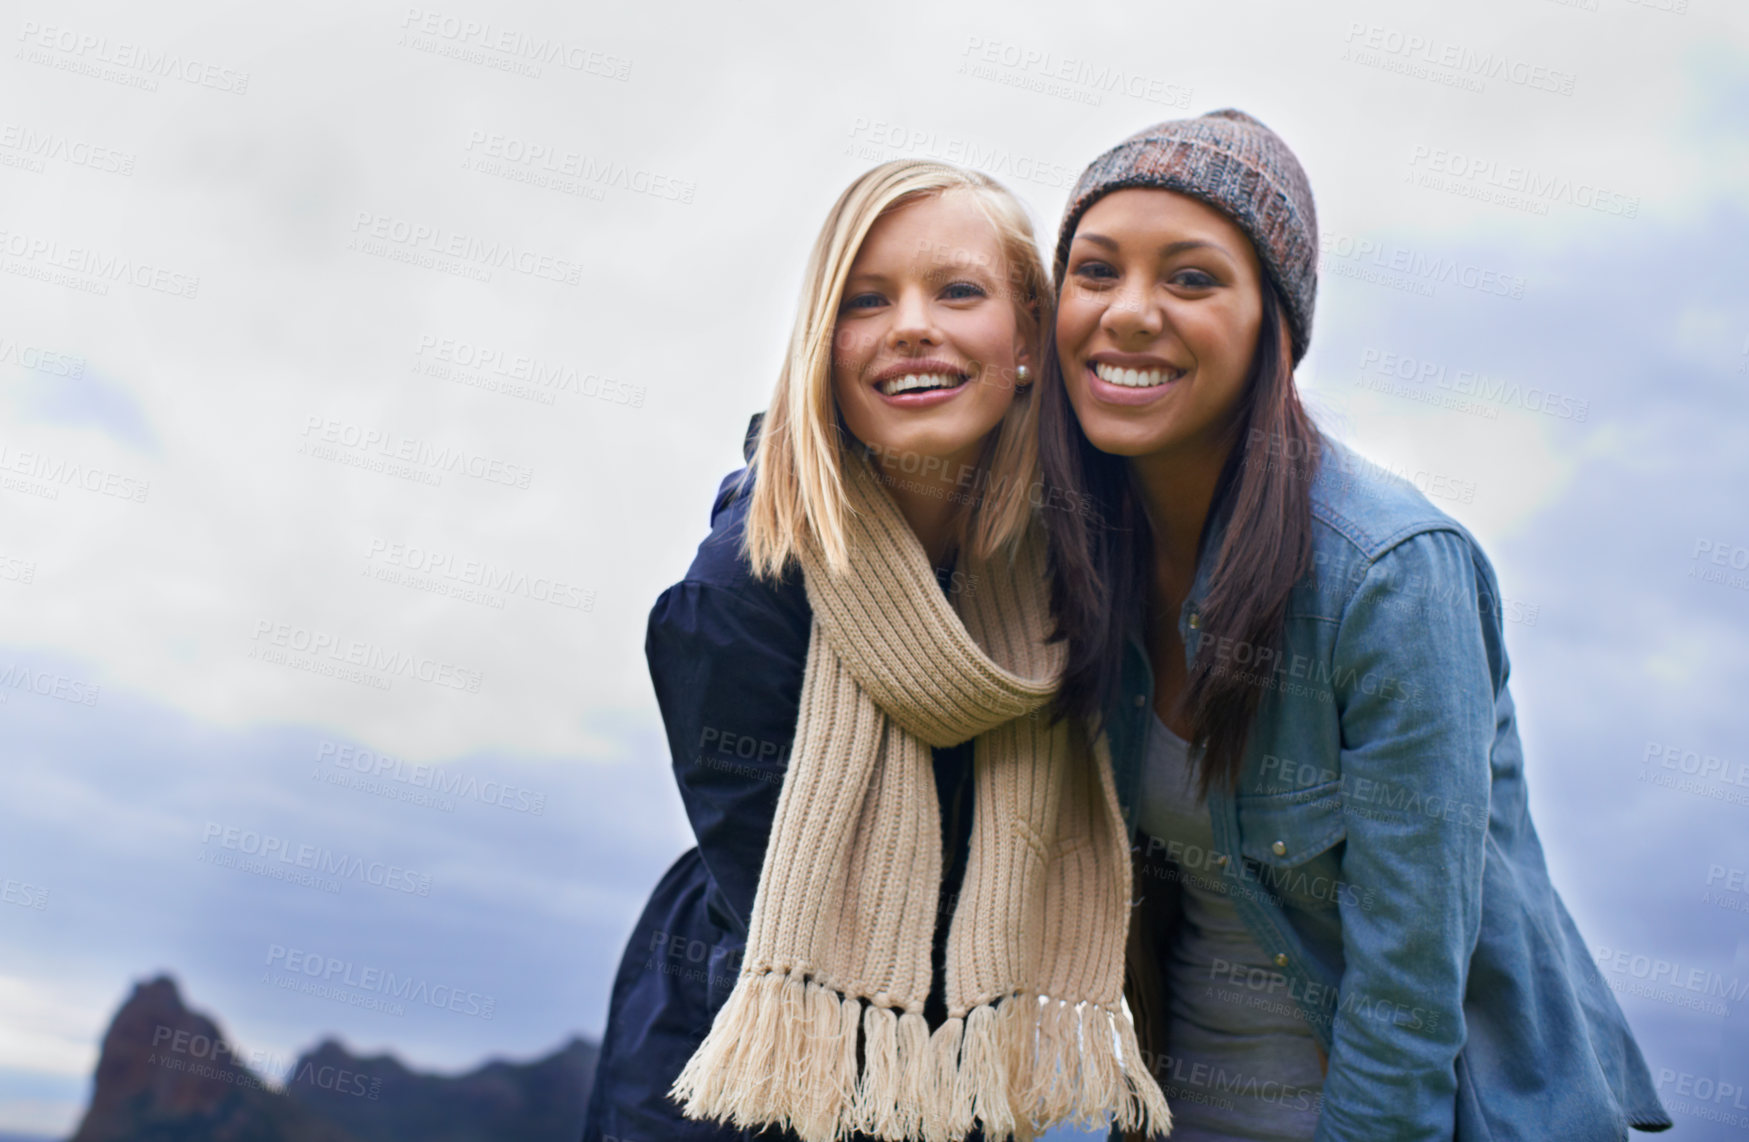 Buy stock photo Two young women laughing outside